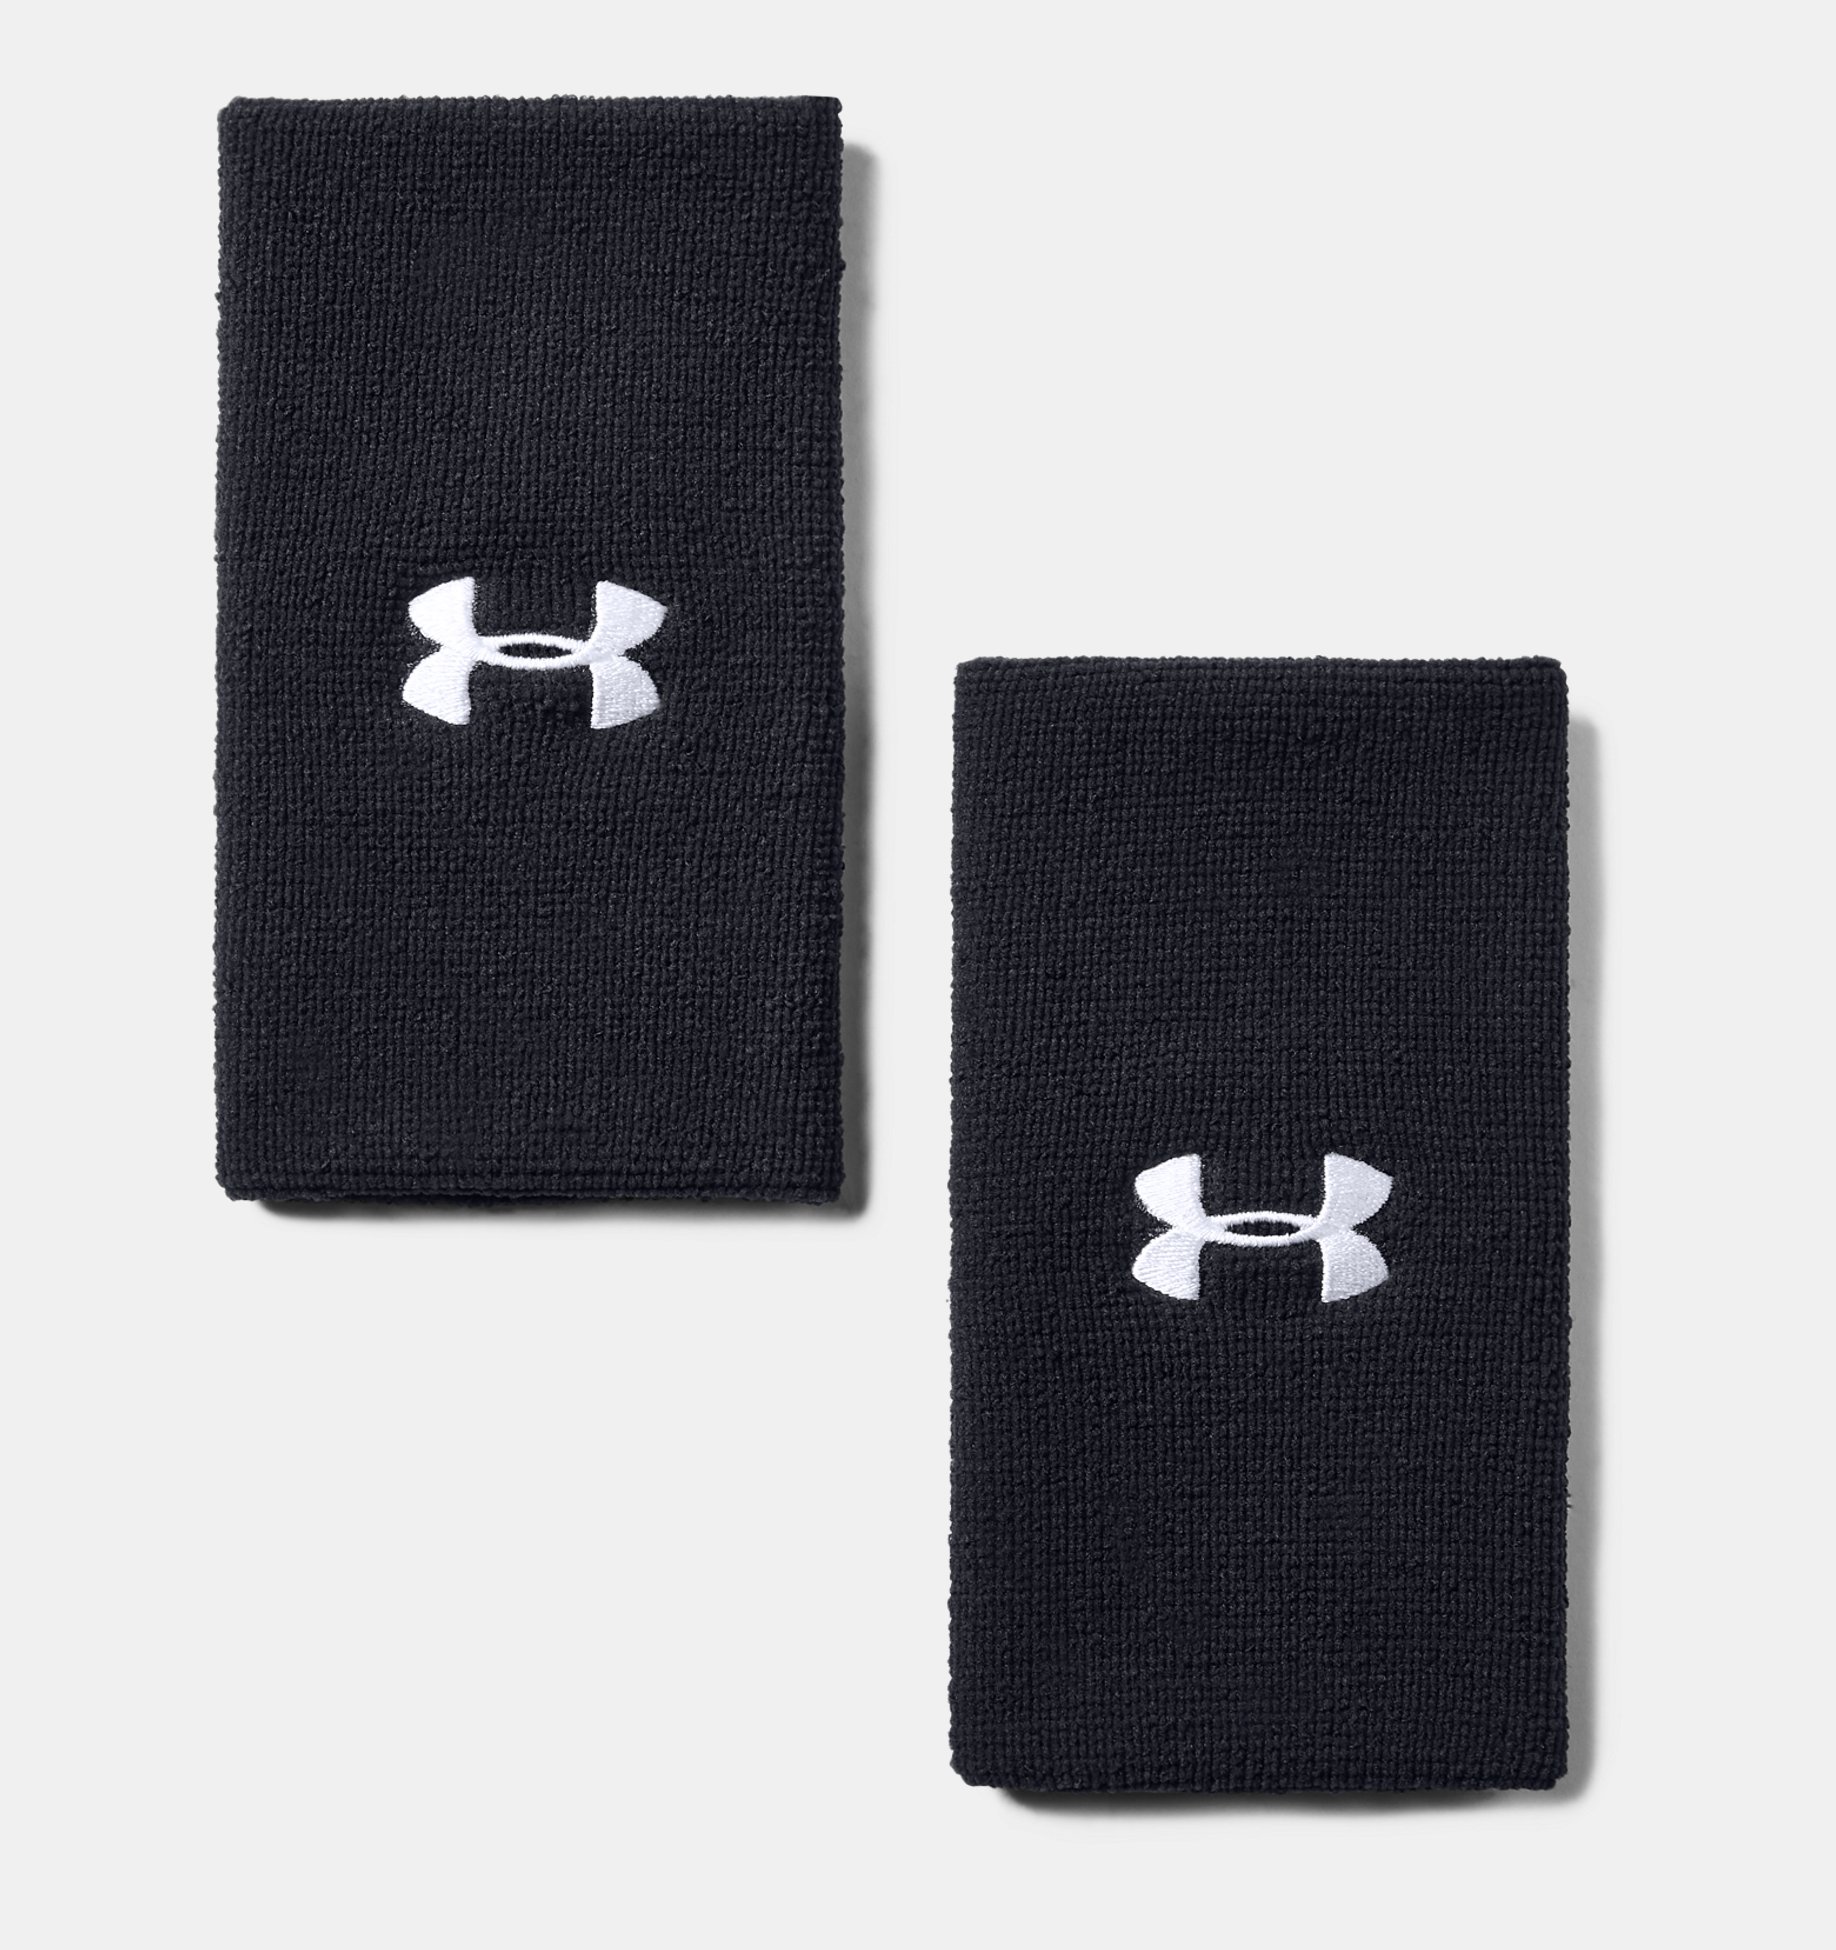 2-Pack Under Armour Adult 6" Performance Wristbands (Black) $4.48 + Free Shipping